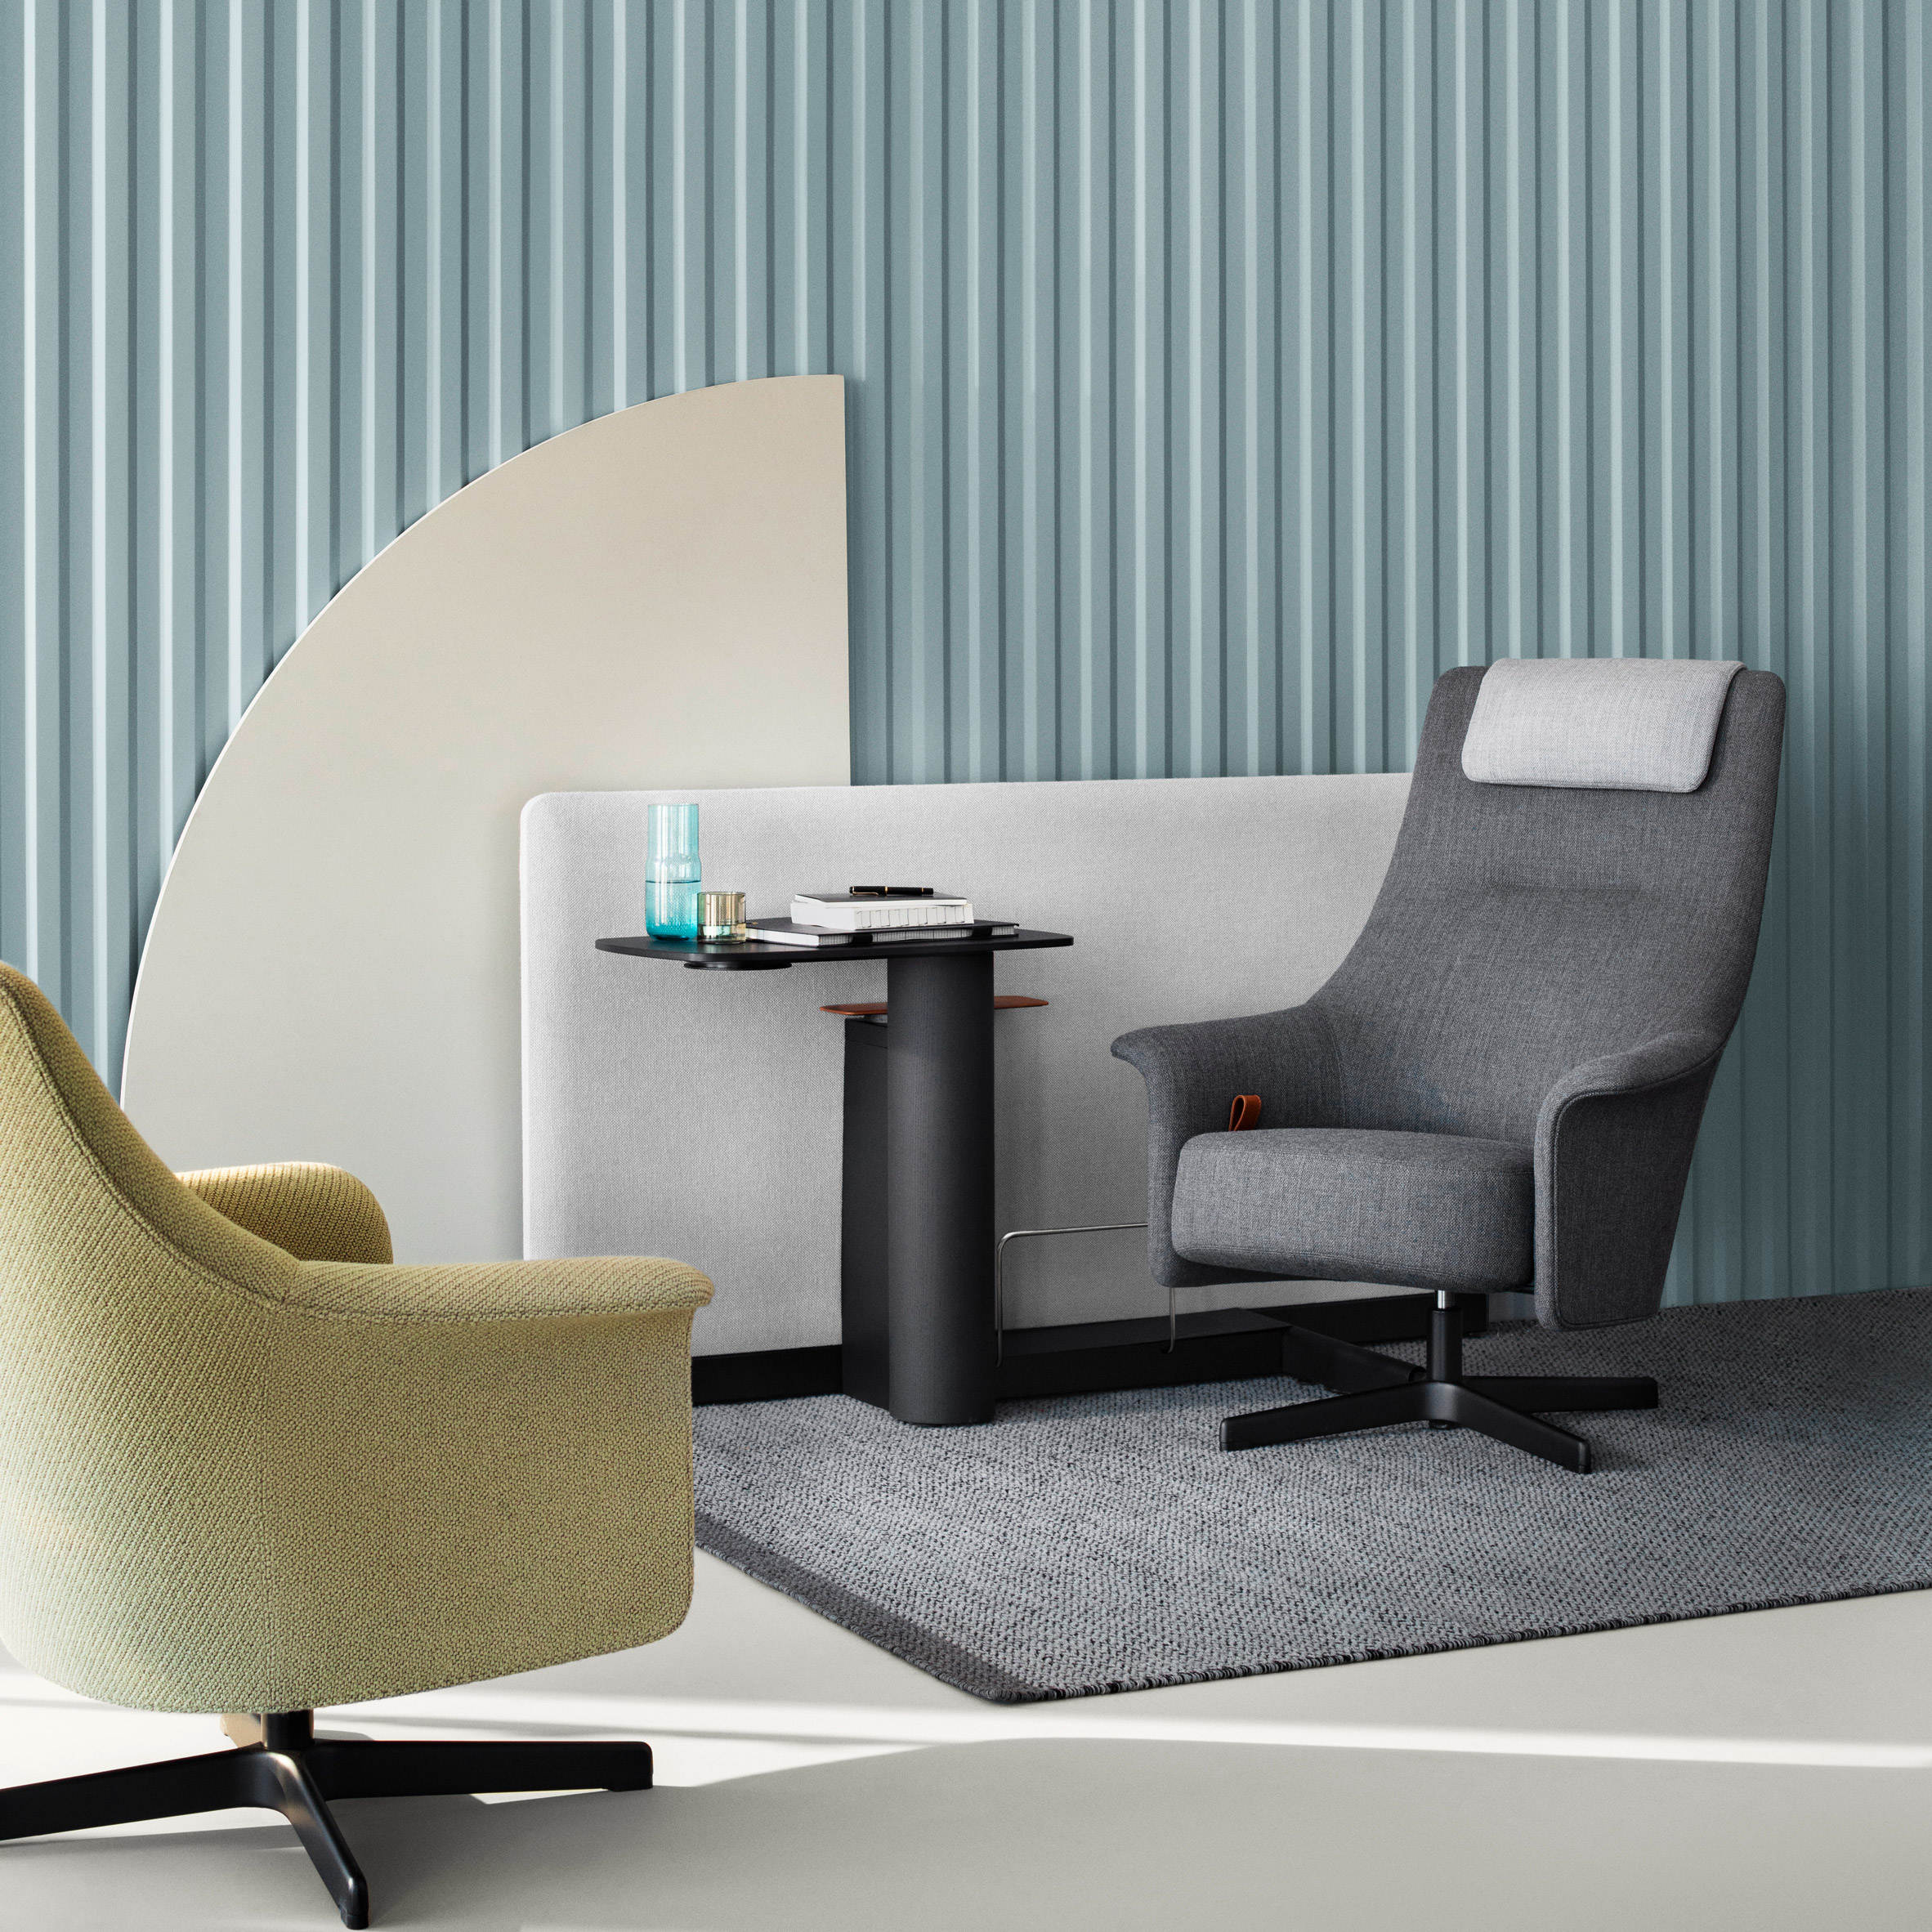 PORTS Lounge by Pearson Lloyd for Bene